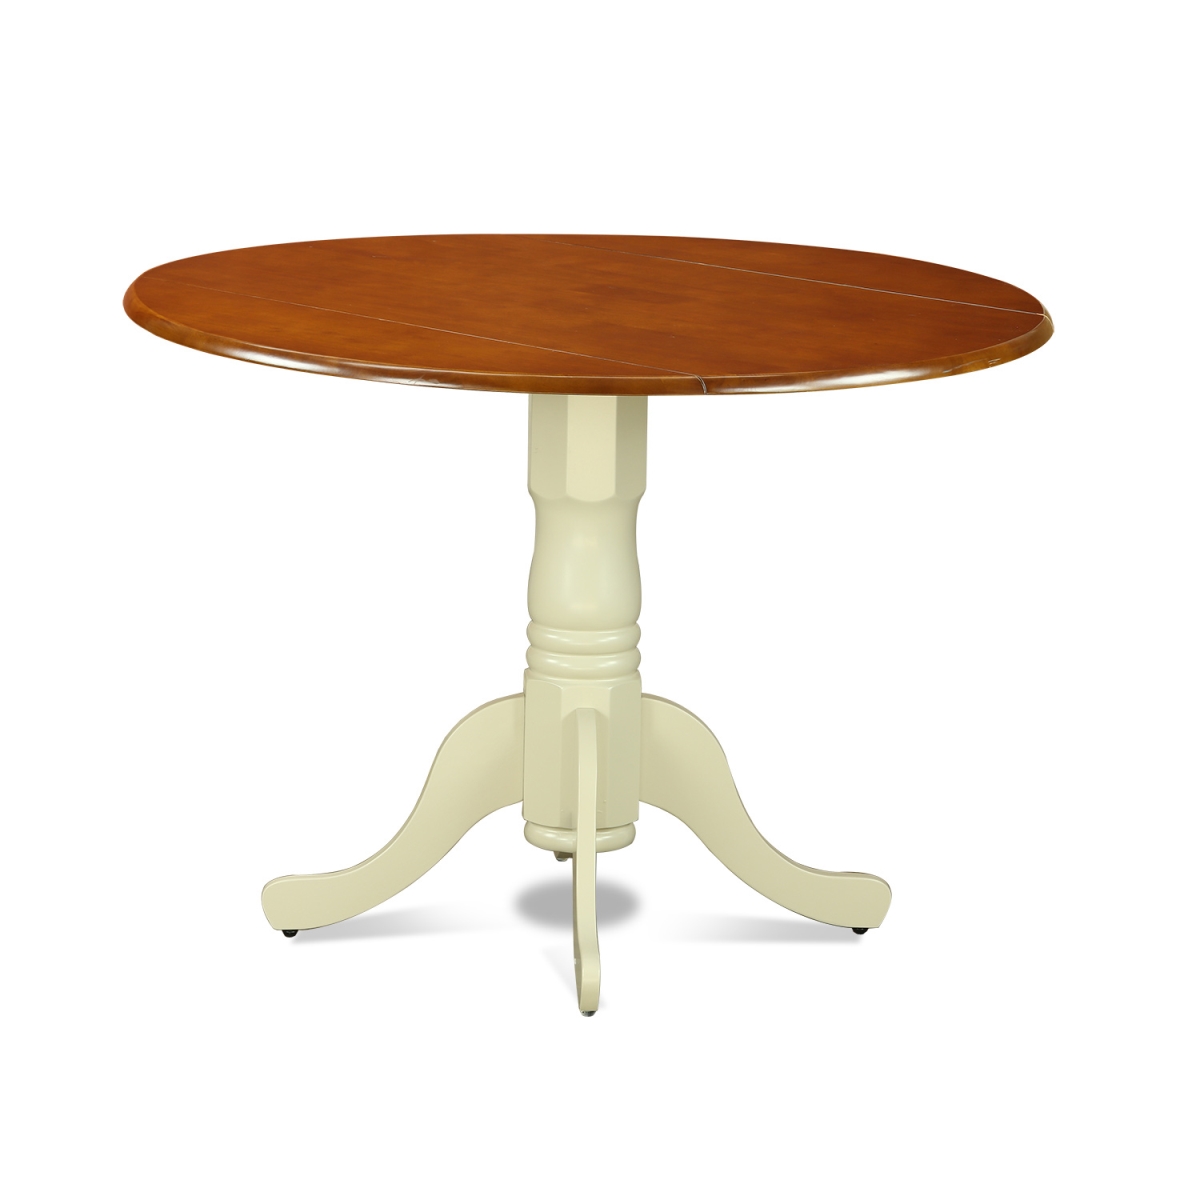 Picture of East West Furniture DLT-BMK-TP Dublin Round Table with two Drop Leaves, Buttermilk & Cherry - 9 in.